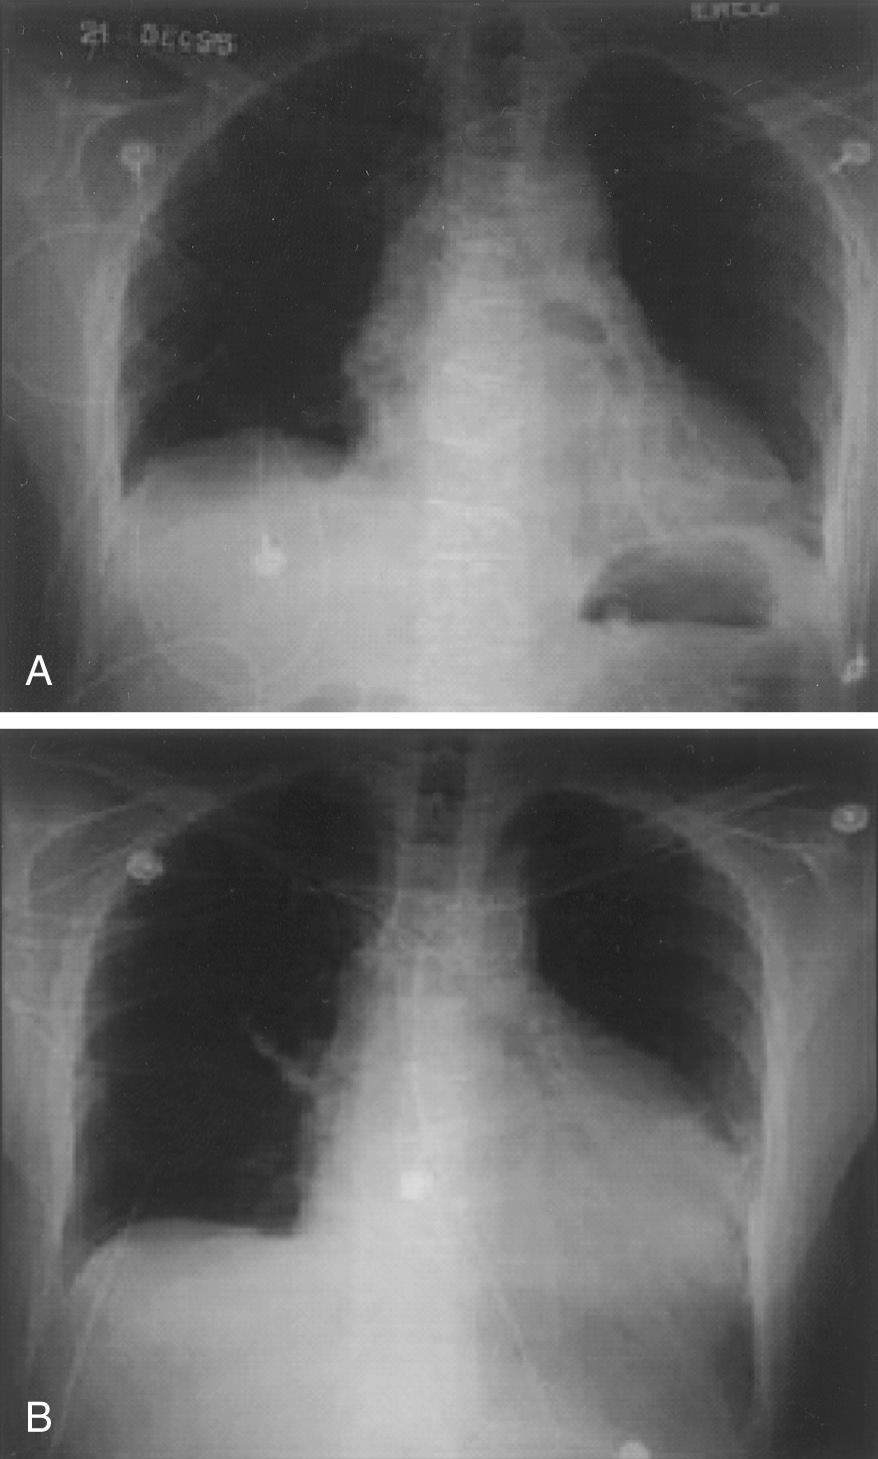 FIGURE 60-1, Post-pericardiotomy syndrome is commonly associated with pericardial and pleural effusions. A, Chest radiograph on a patient soon after aortic valve replacement shows expected postoperative findings. B, Chest radiograph 2 weeks later shows pericardial effusion compatible with the clinical symptoms of post-pericardiotomy syndrome.